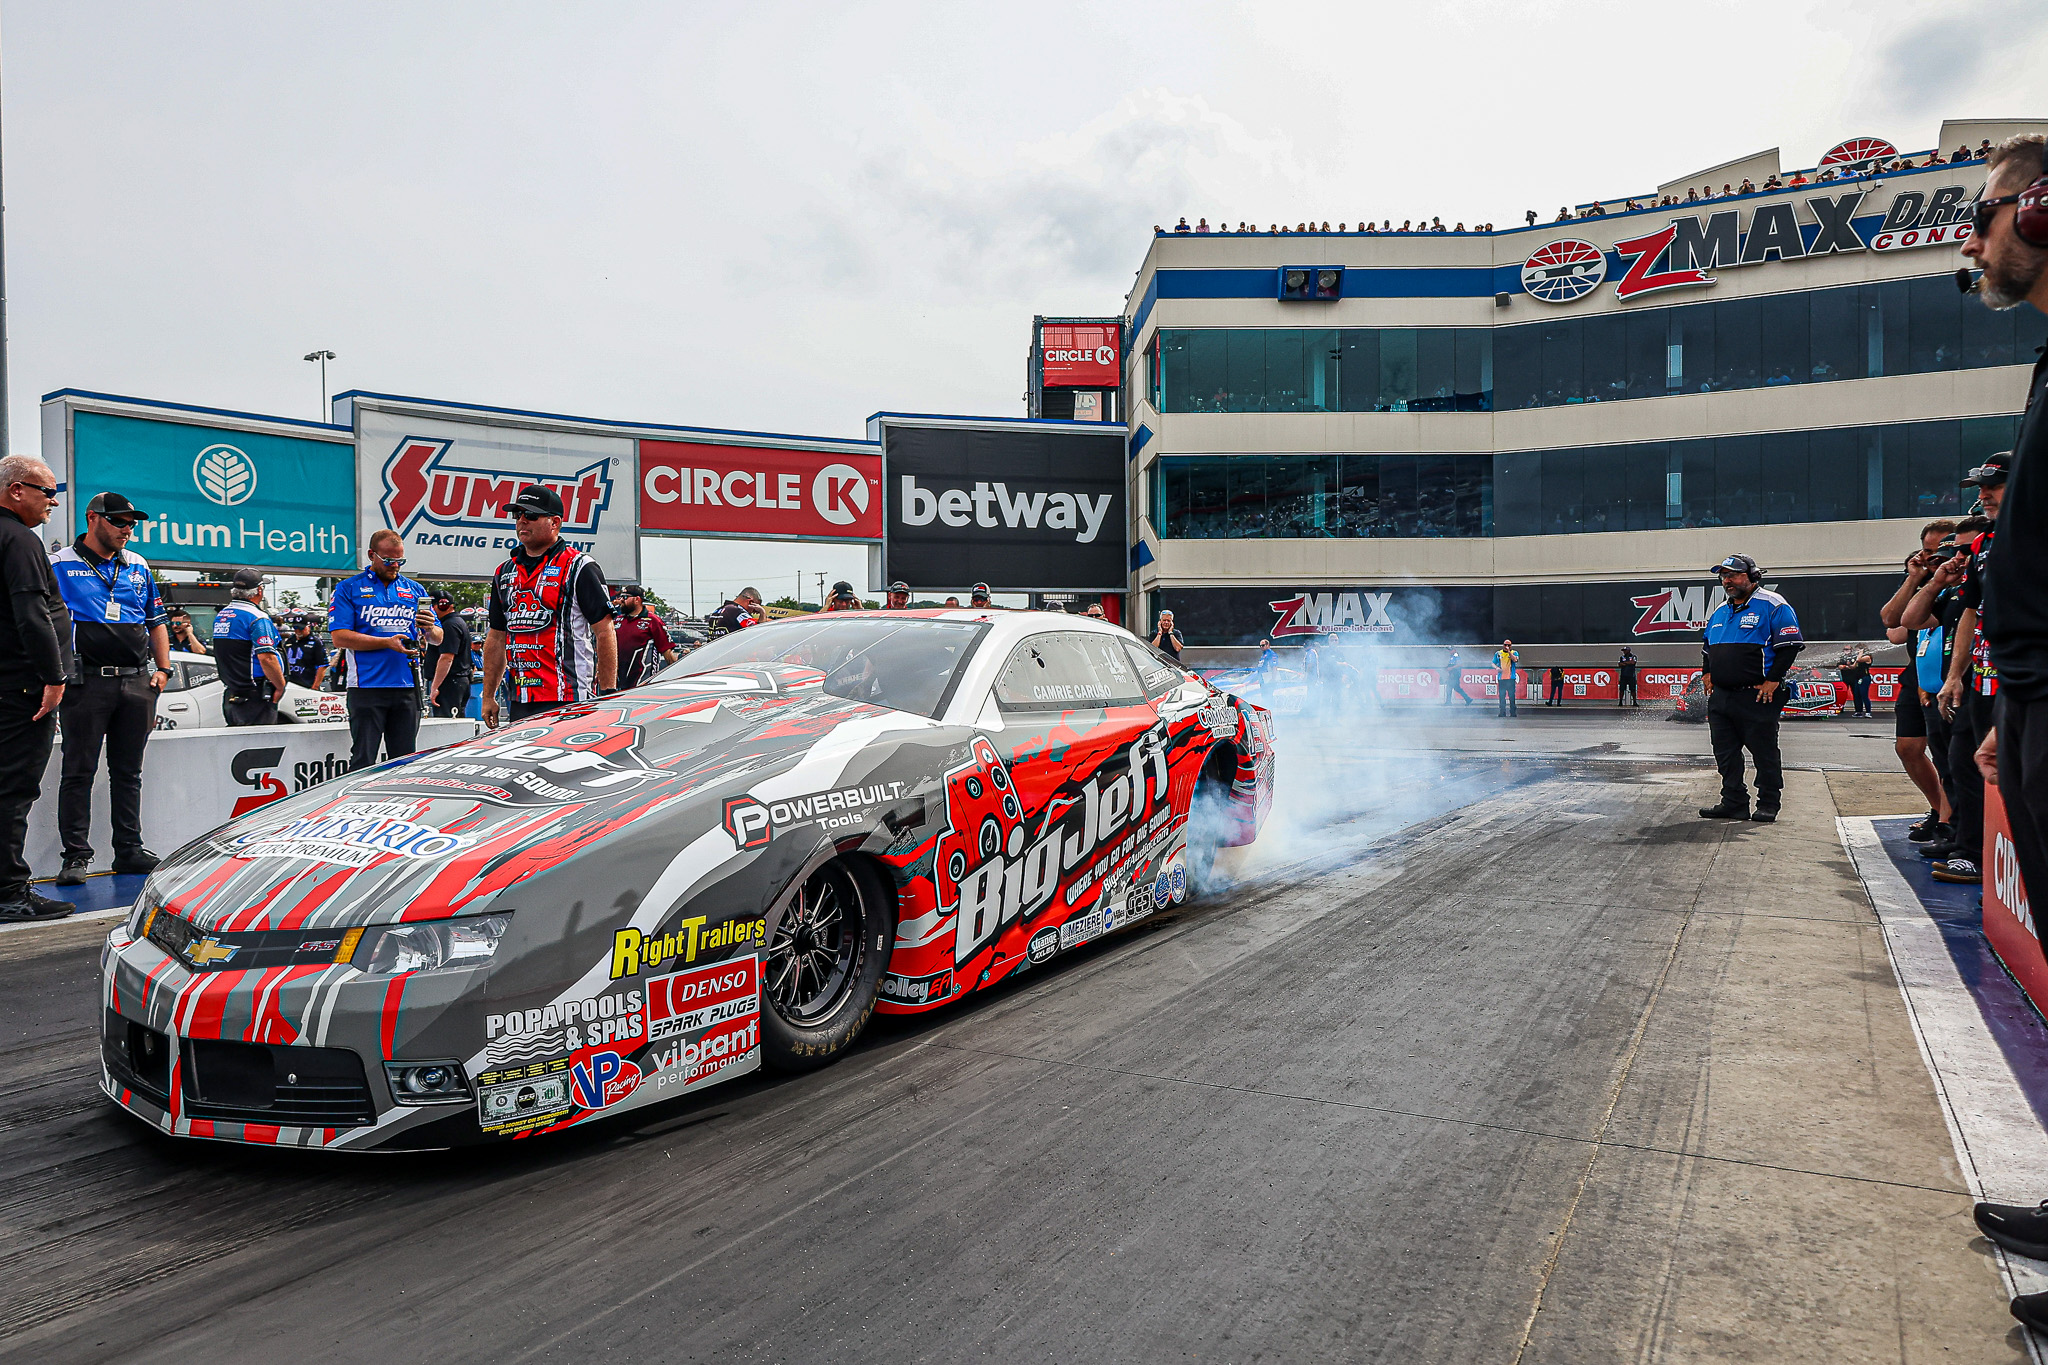 Caruso clinched her spot driving the Big Jeff Audio Chevrolet Camaro at the Circle K NHRA Four-Wide Nationals, photo courtesy of SR Driven Media.